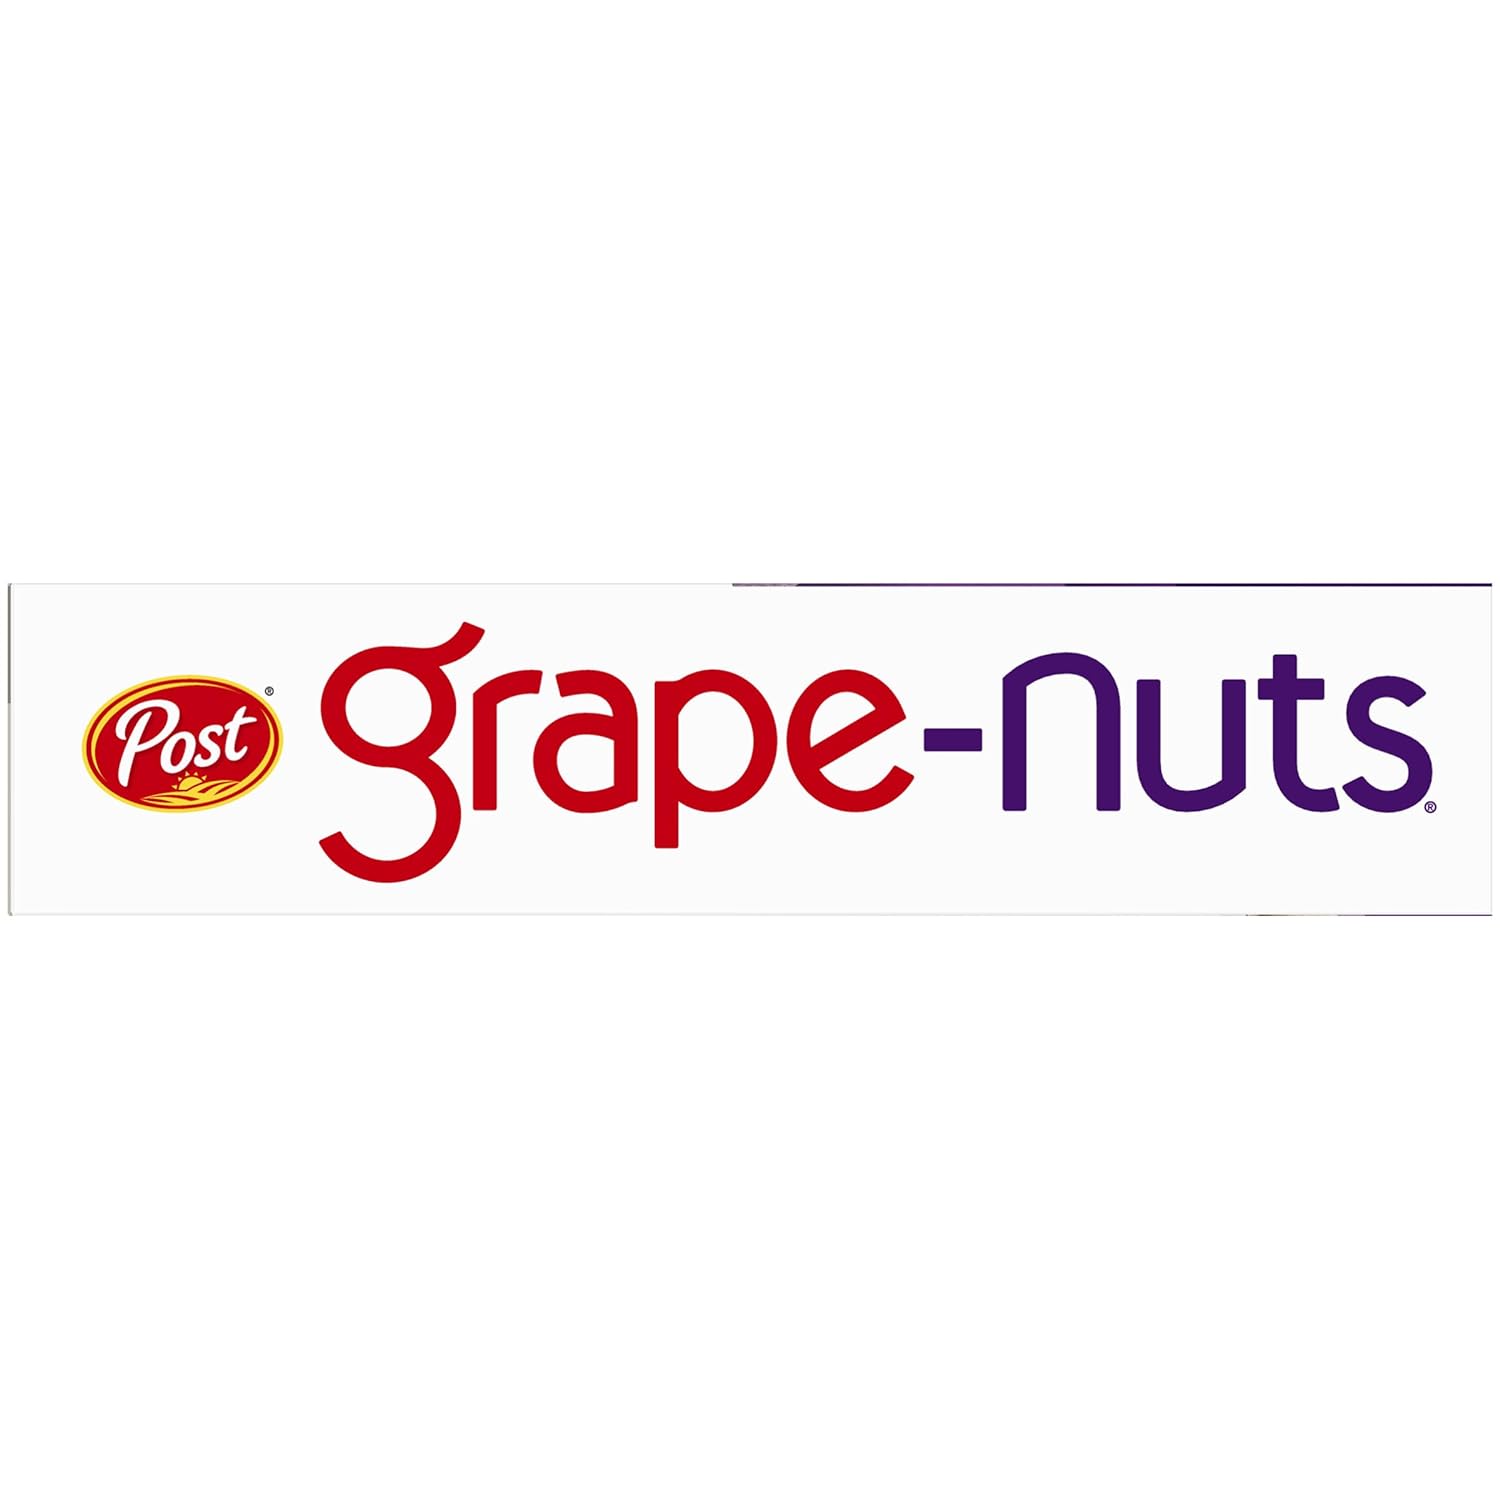 Grape Nuts Original Breakfast Cereal, Crunchy Whole Grain Wheat and Barley Cereal, Non-GMO Project Verified, 29 OZ Box (Pack of 10)